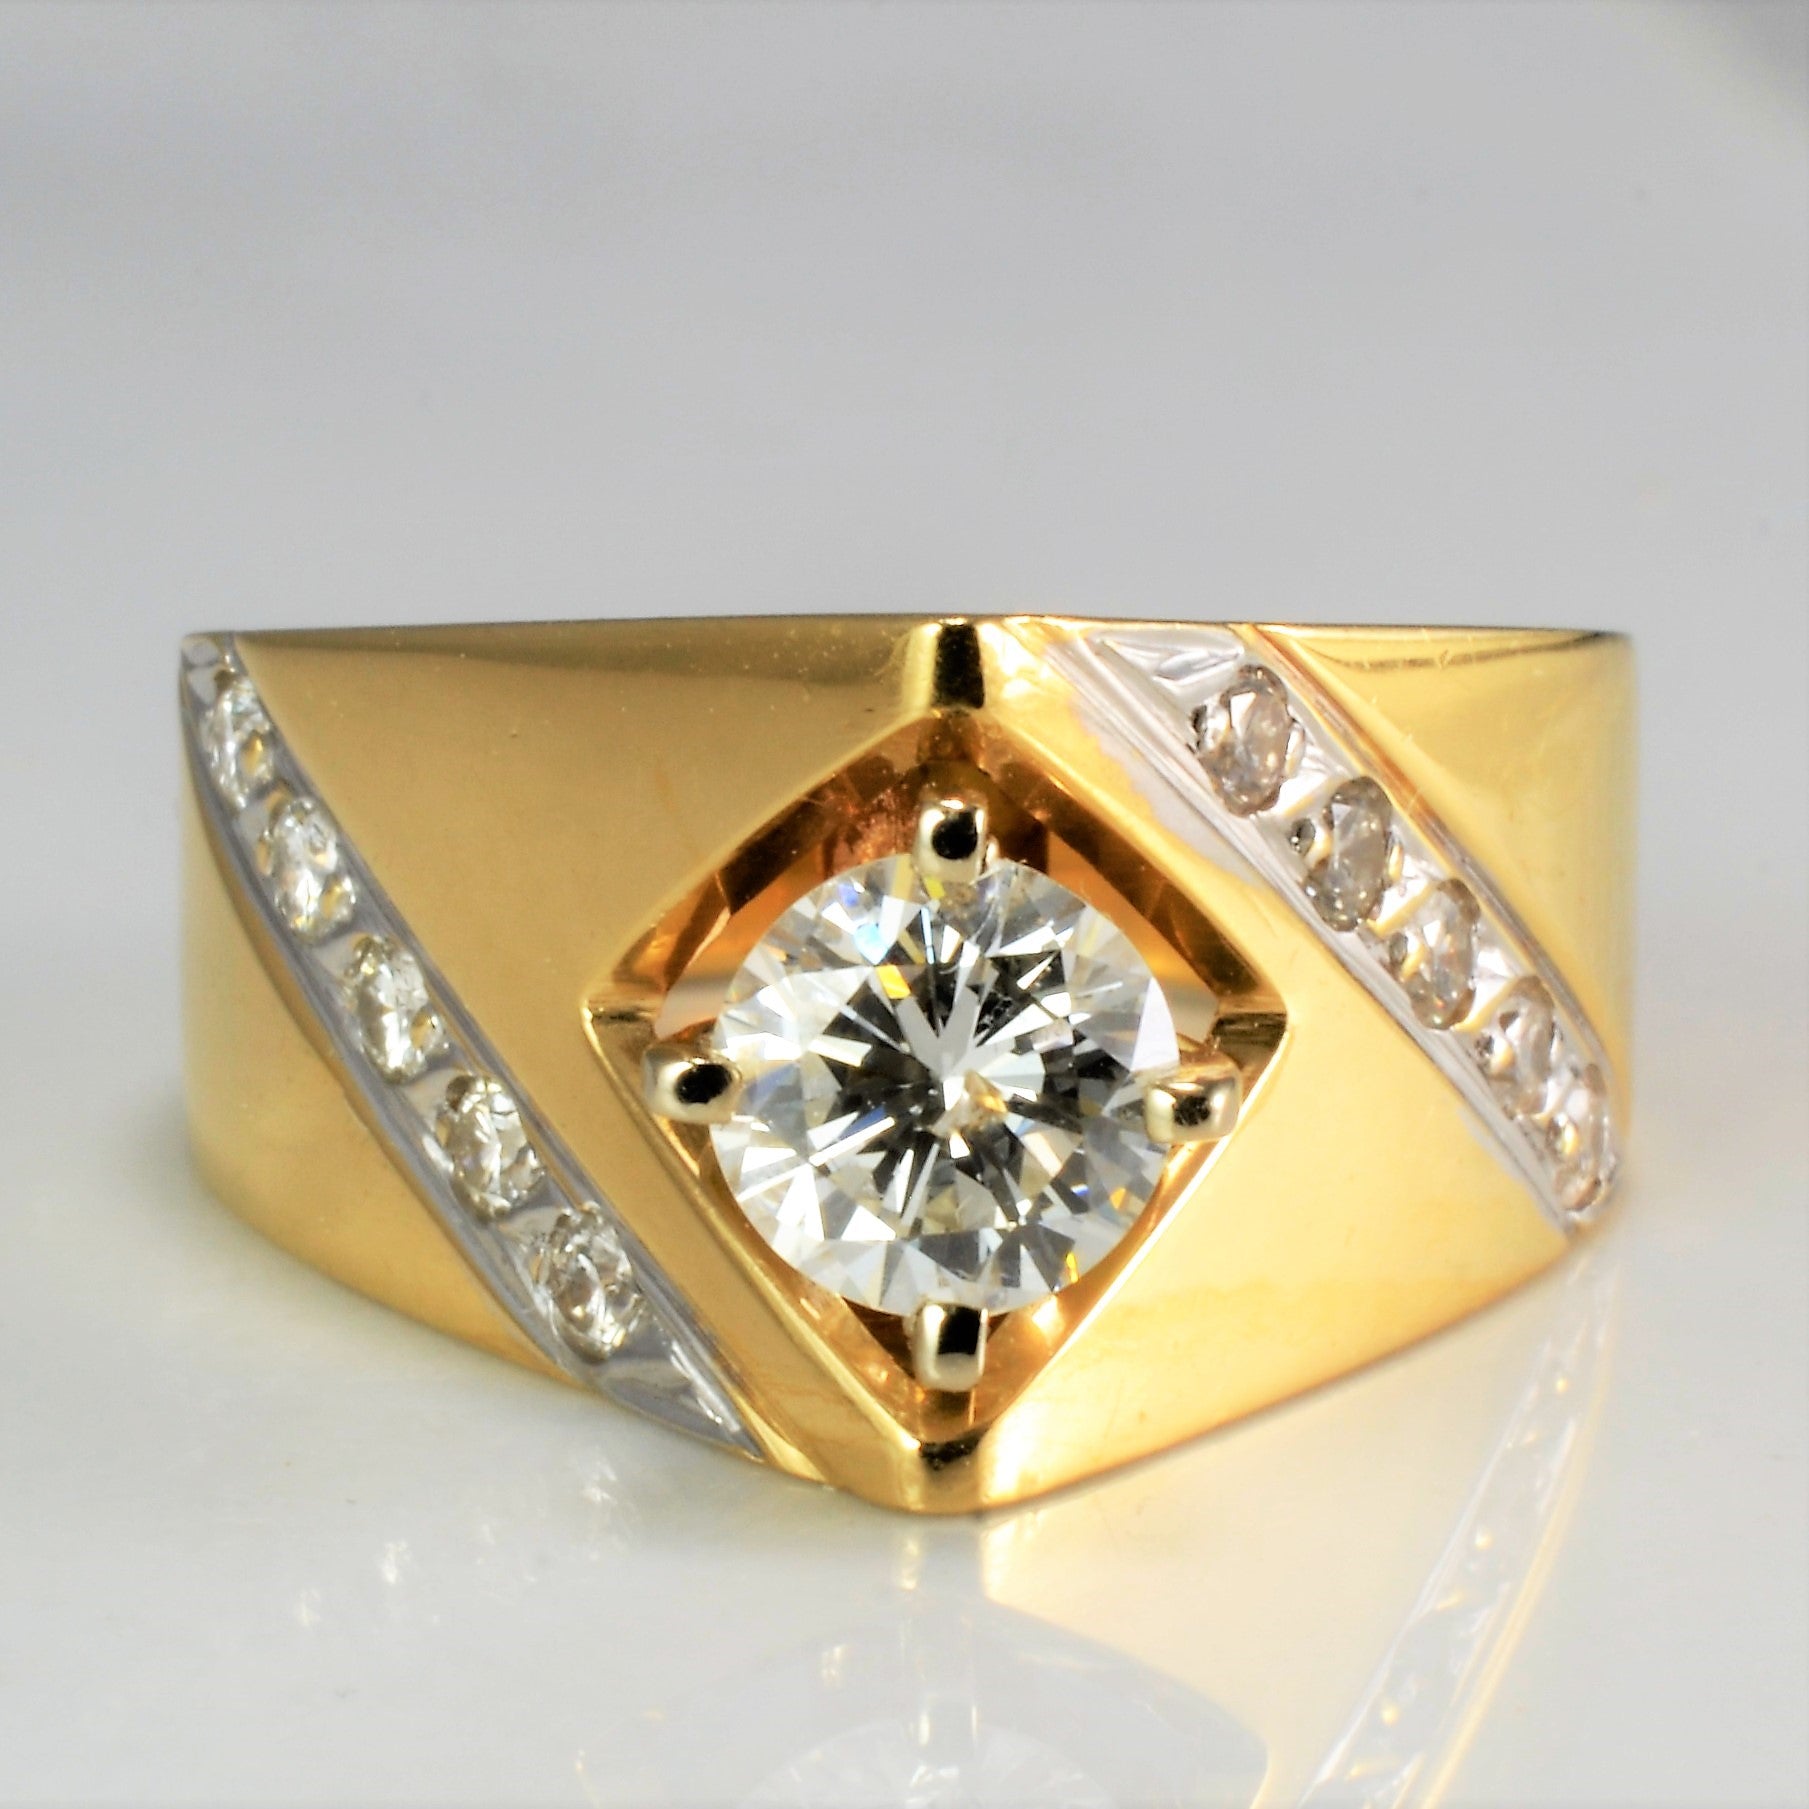 High Set Solitaire with Accents Diamond Ring | 0.73 ctw, SZ 5.75 ...